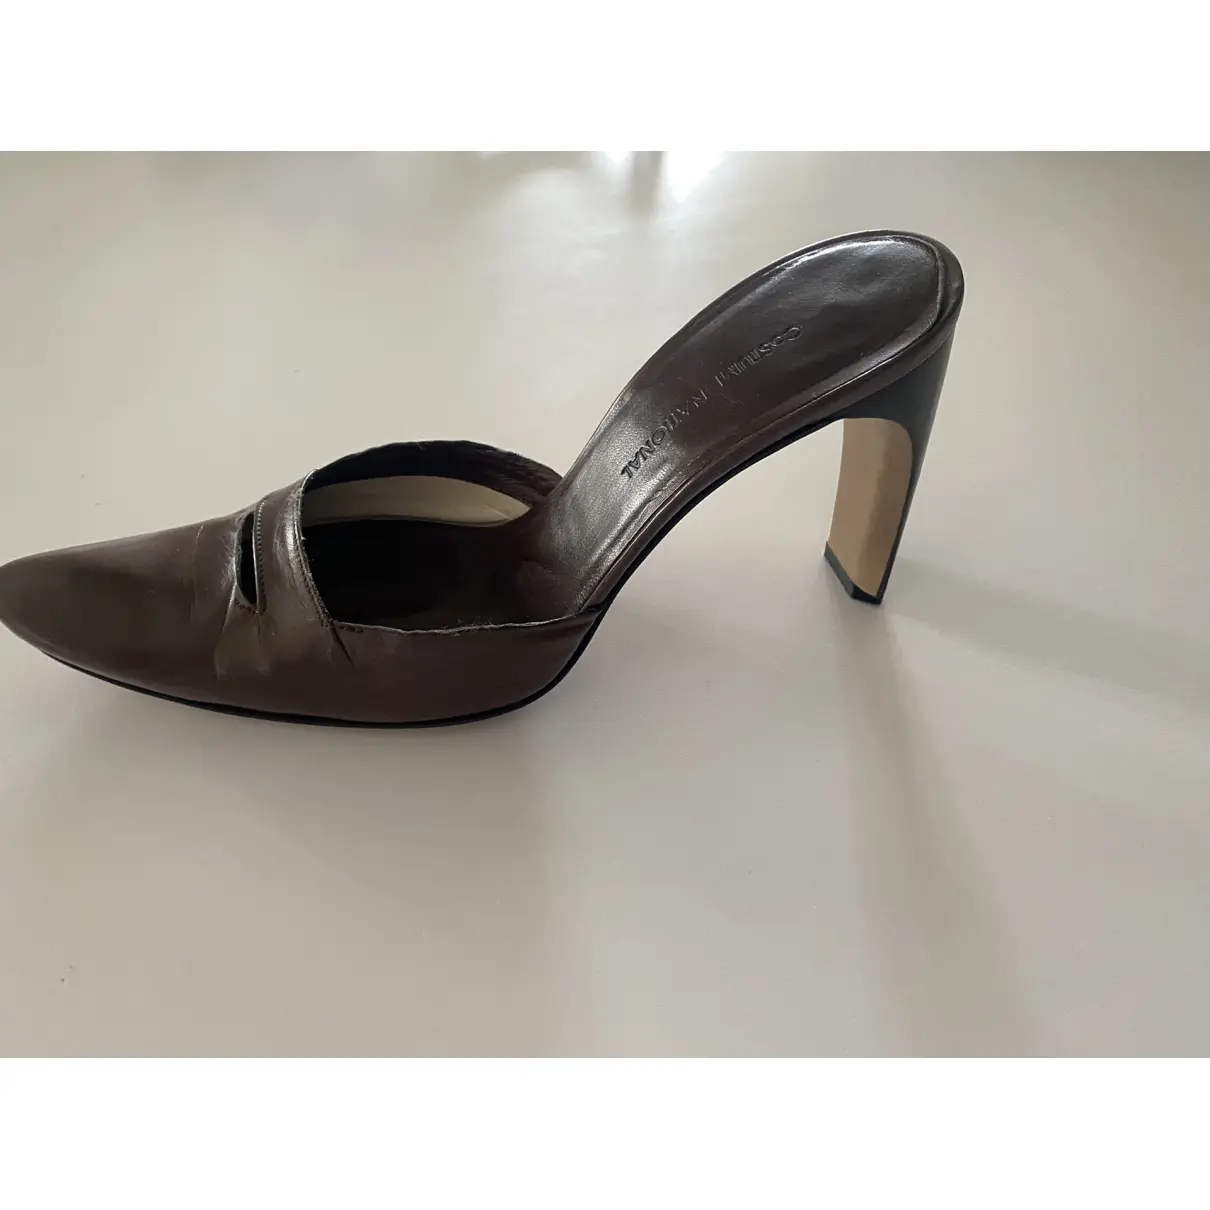 Buy Costume National Leather sandals online